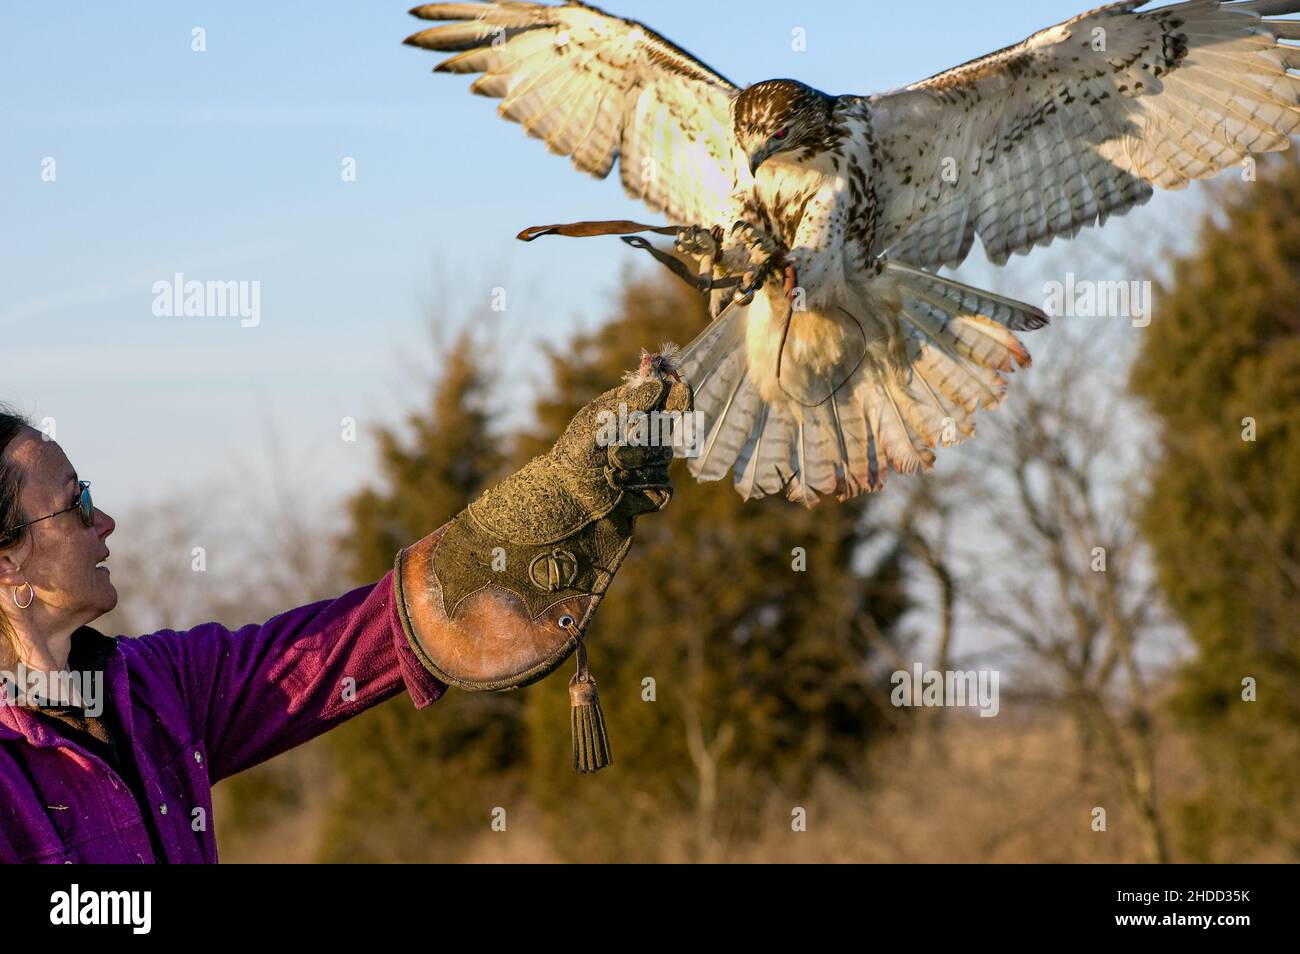 Red-tailed Hawk (Buteo jamaicensis) coming in to land on a falconer's glove holding chicken meat. Stock Photo